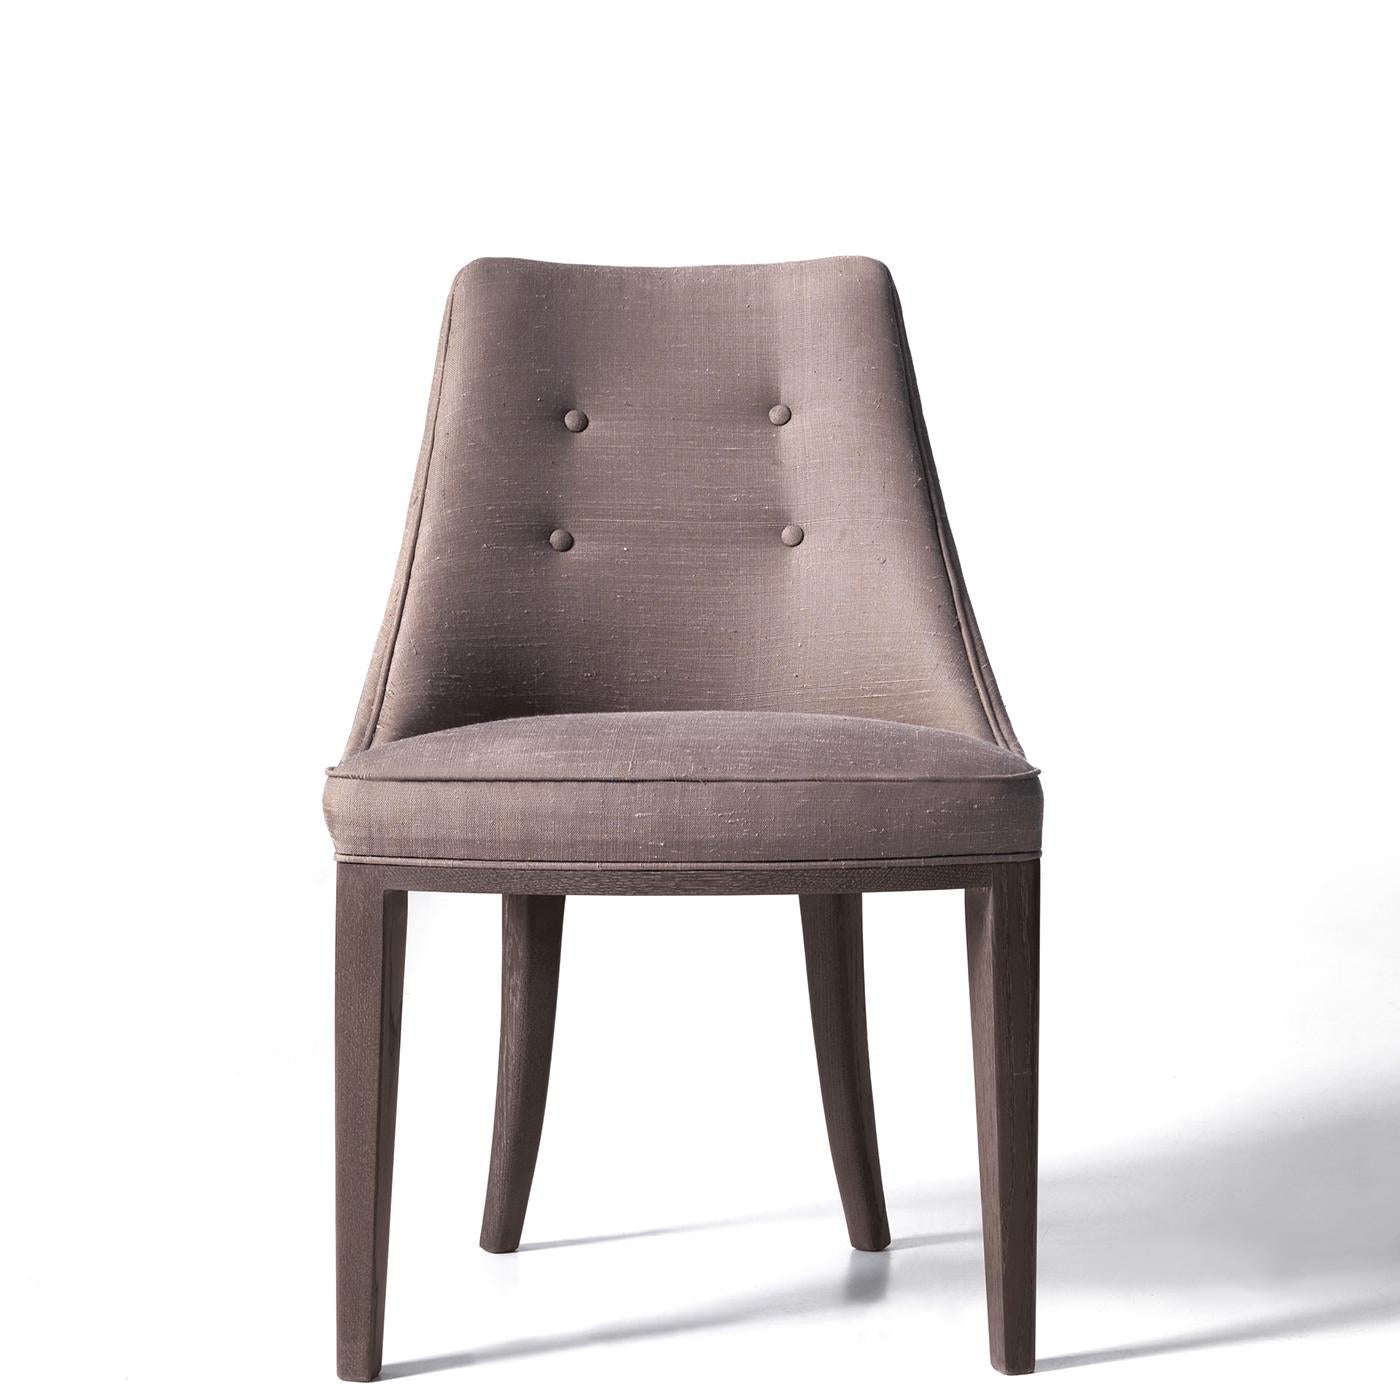 A plush and welcoming design characterizes this refined chair, whose sturdy durmast structure features a generously padded seat and curved backrest both upholstered in gray fabric with subtle button accents. flaunts an alluring finish of satin